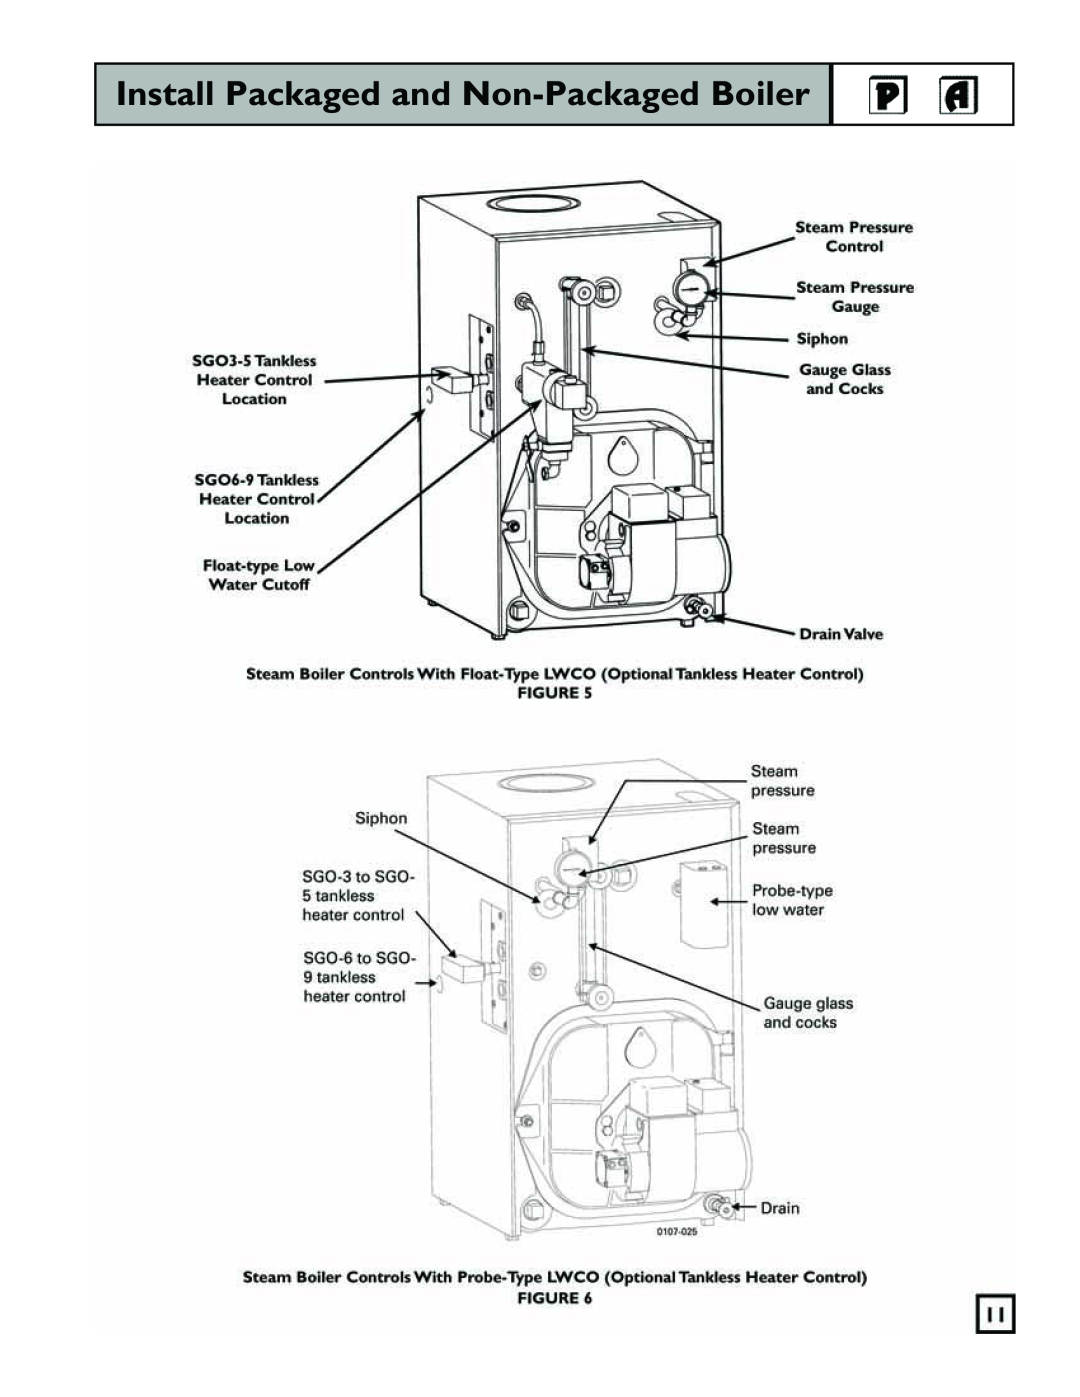 Weil-McLain 550-141-829/1201 manual Install Packaged and Non-PackagedBoiler 